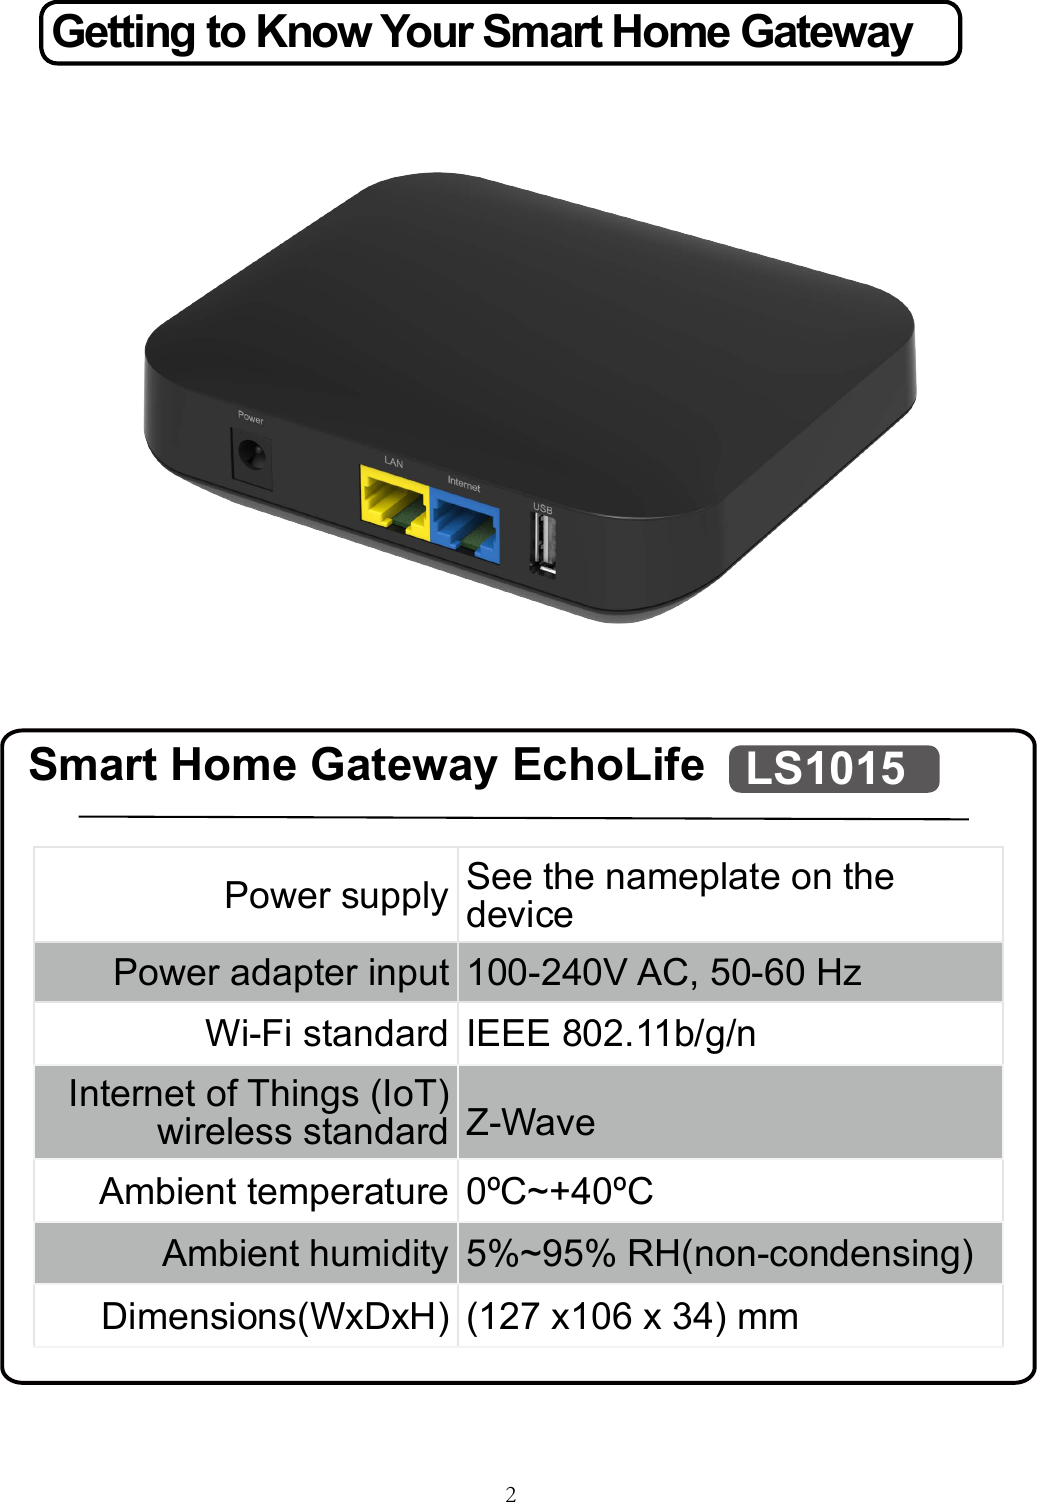 Power supply See the nameplate on the devicePower adapter input 100-240V AC, 50-60 HzWi-Fi standard IEEE 802.11b/g/nInternet of Things (IoT) wireless standard Z-WaveAmbient temperature 0ºC~+40ºCAmbient humidity 5%~95% RH(non-condensing)Dimensions(WxDxH) (127 x106 x 34) mmSmart Home Gateway EchoLife LS1015Getting to Know Your Smart Home Gateway2